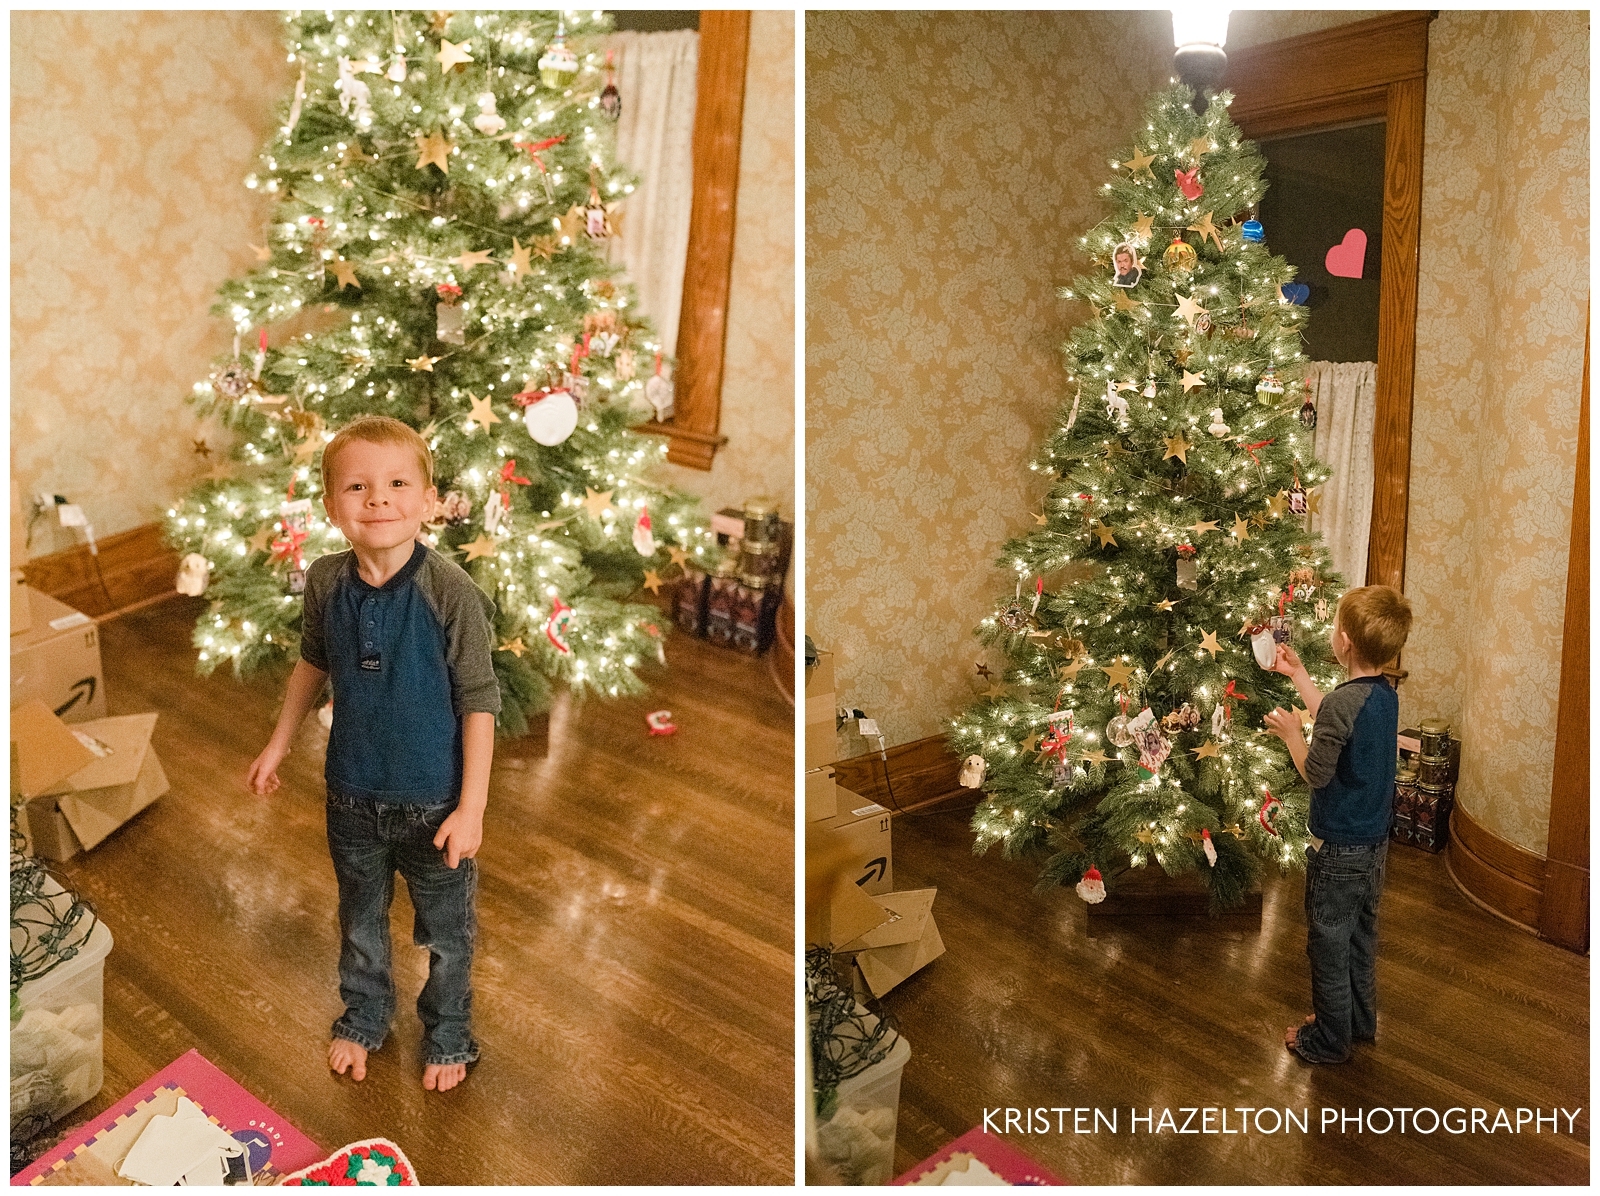 Young boy putting ornaments on a christmas tree